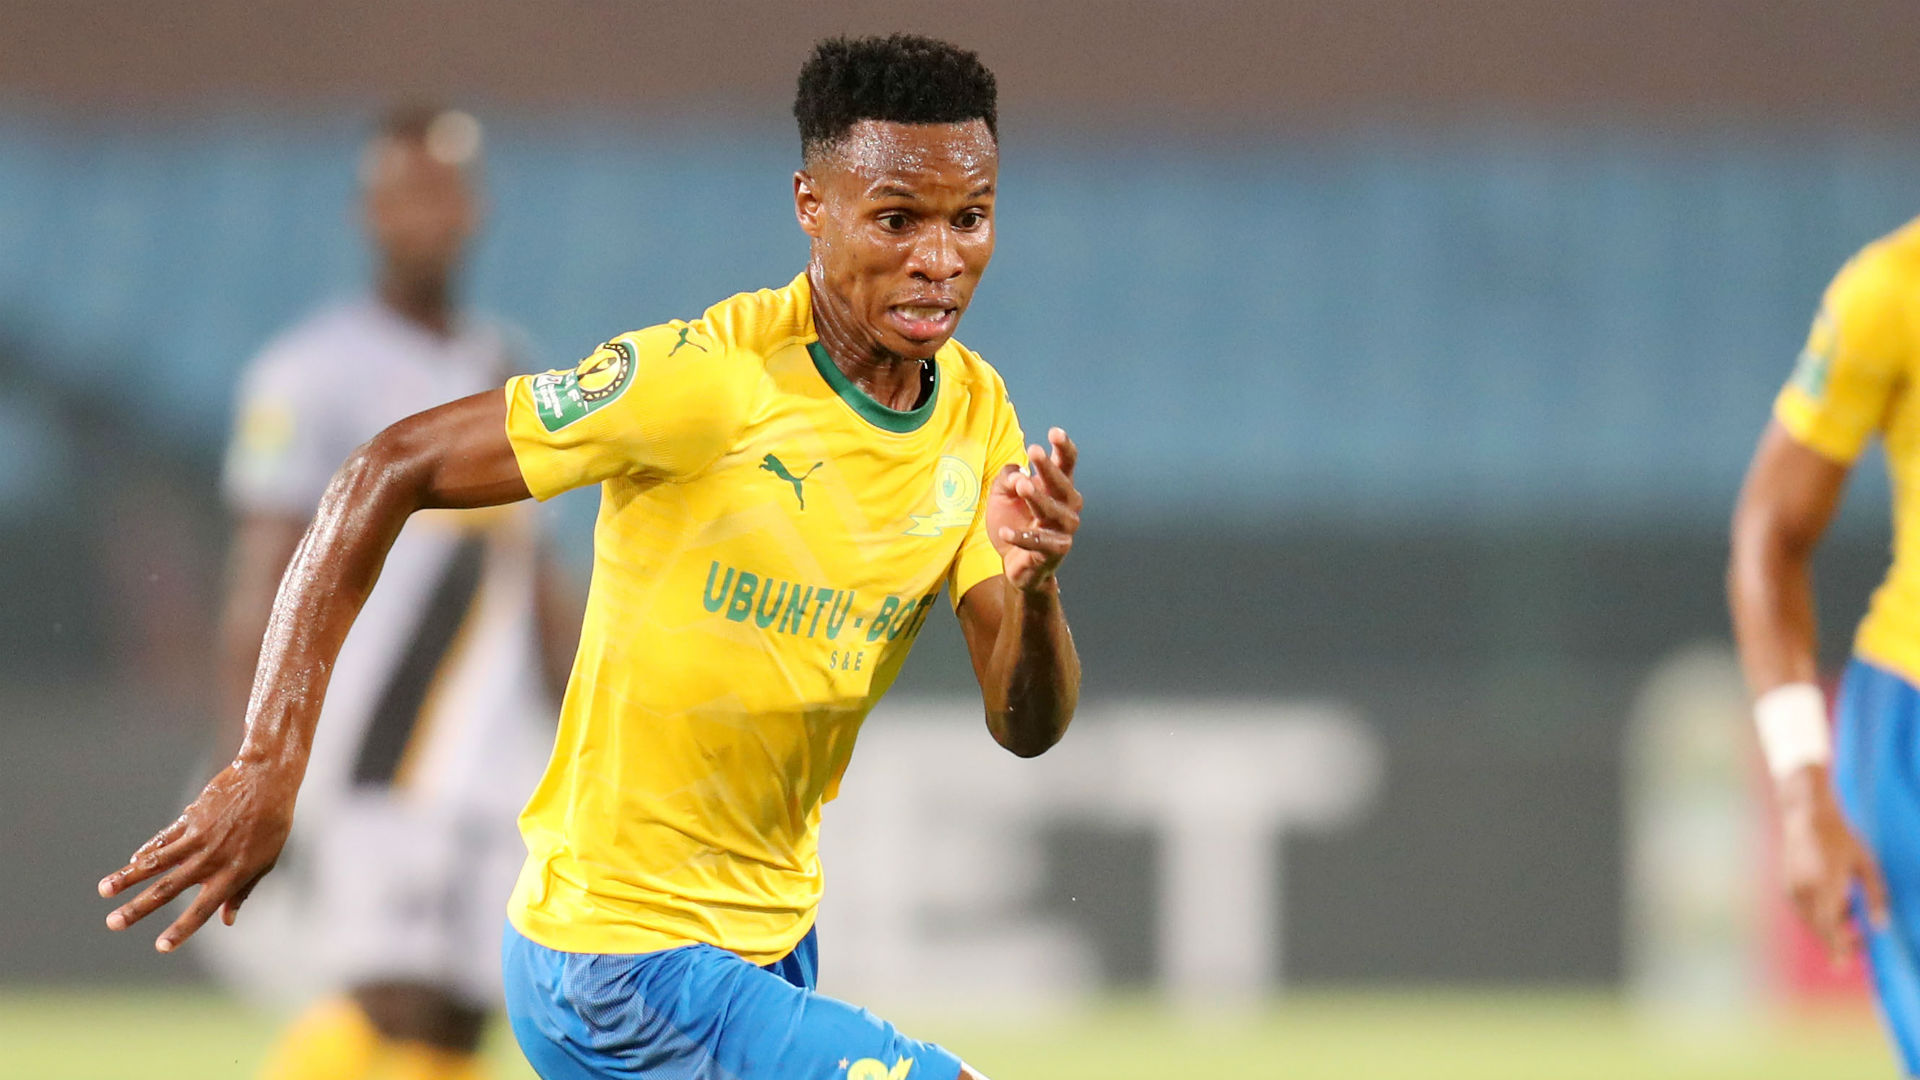 Mamelodi Sundowns 3-1 Stellenbosch FC: Brazilians move to within 10 points of Kaizer Chiefs after dominant second half